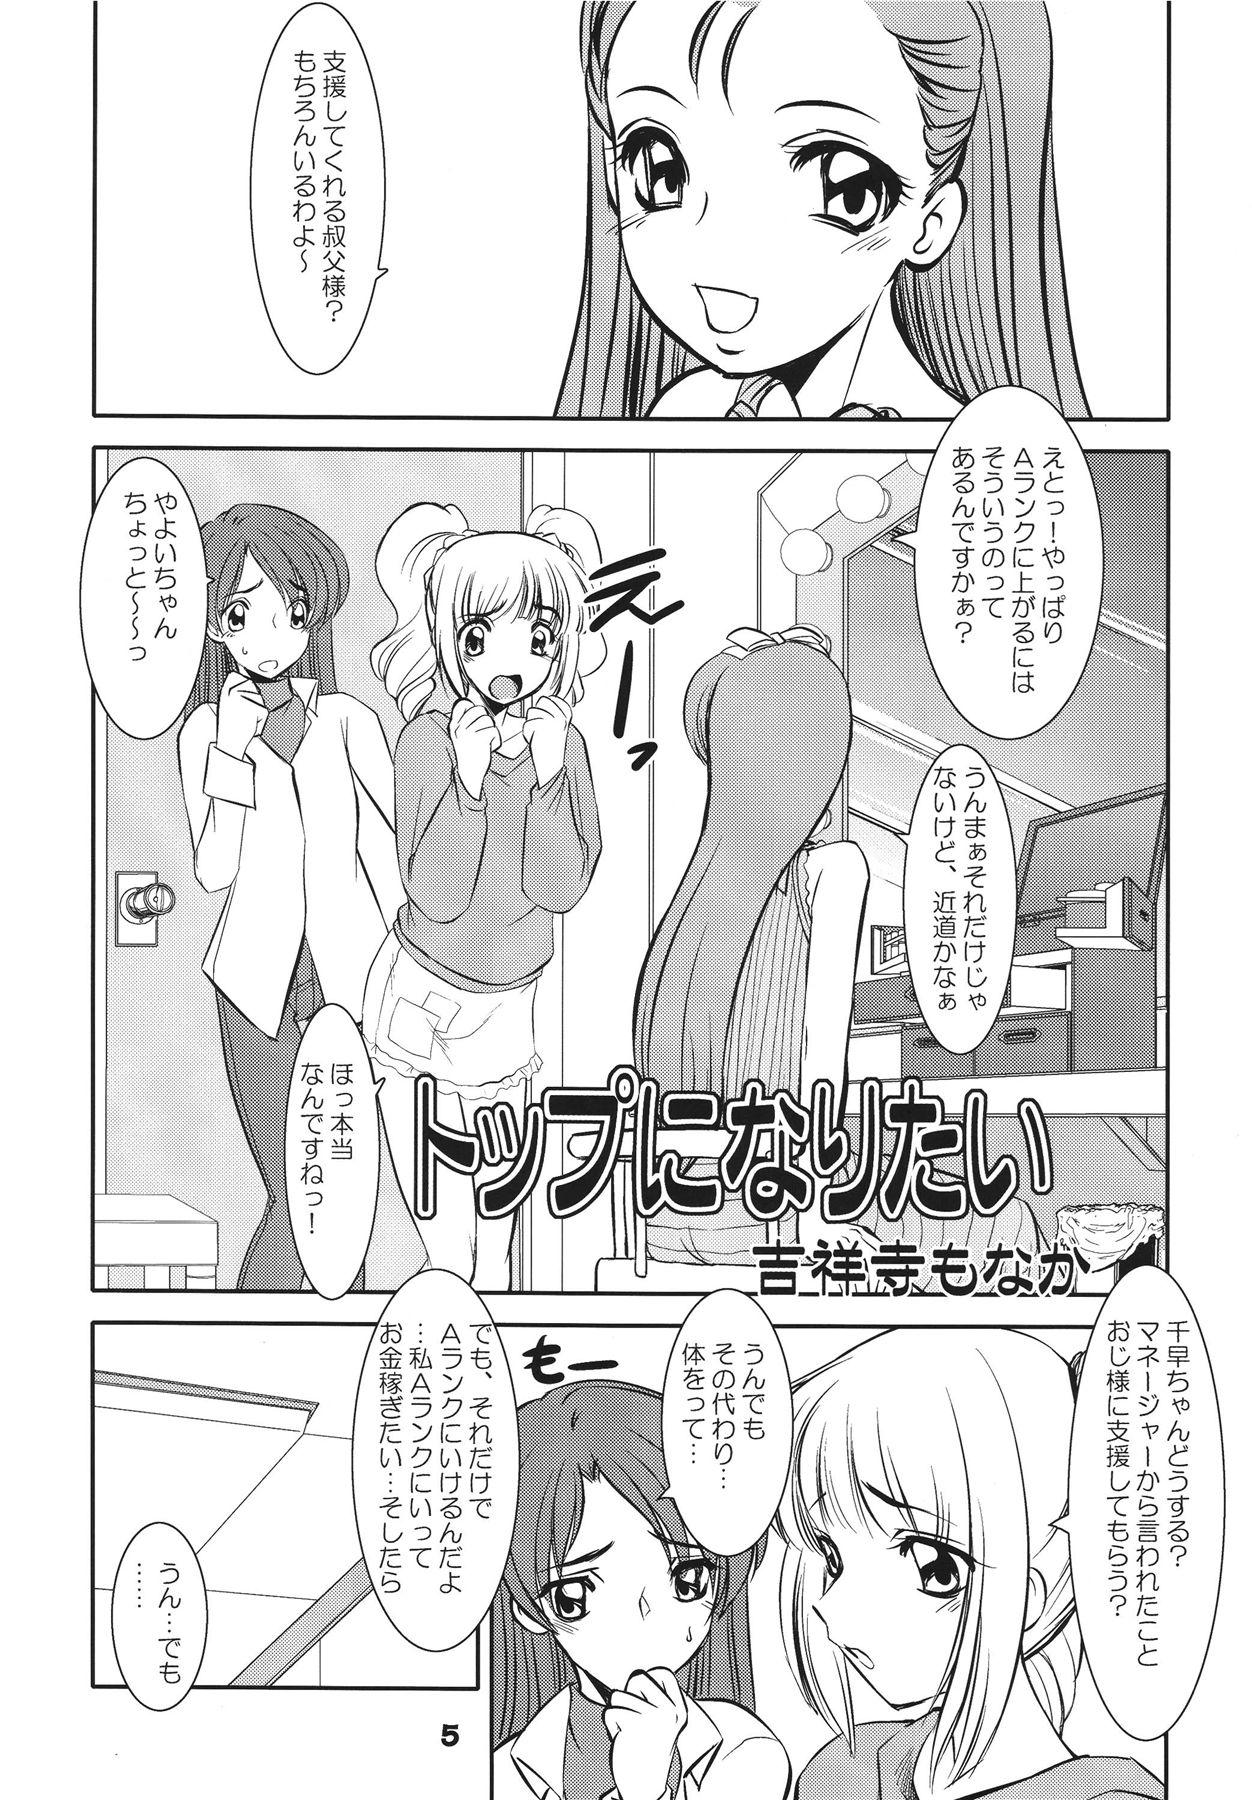 Twinkstudios TOUCH MY HE@RT4 - The idolmaster Hung - Page 5